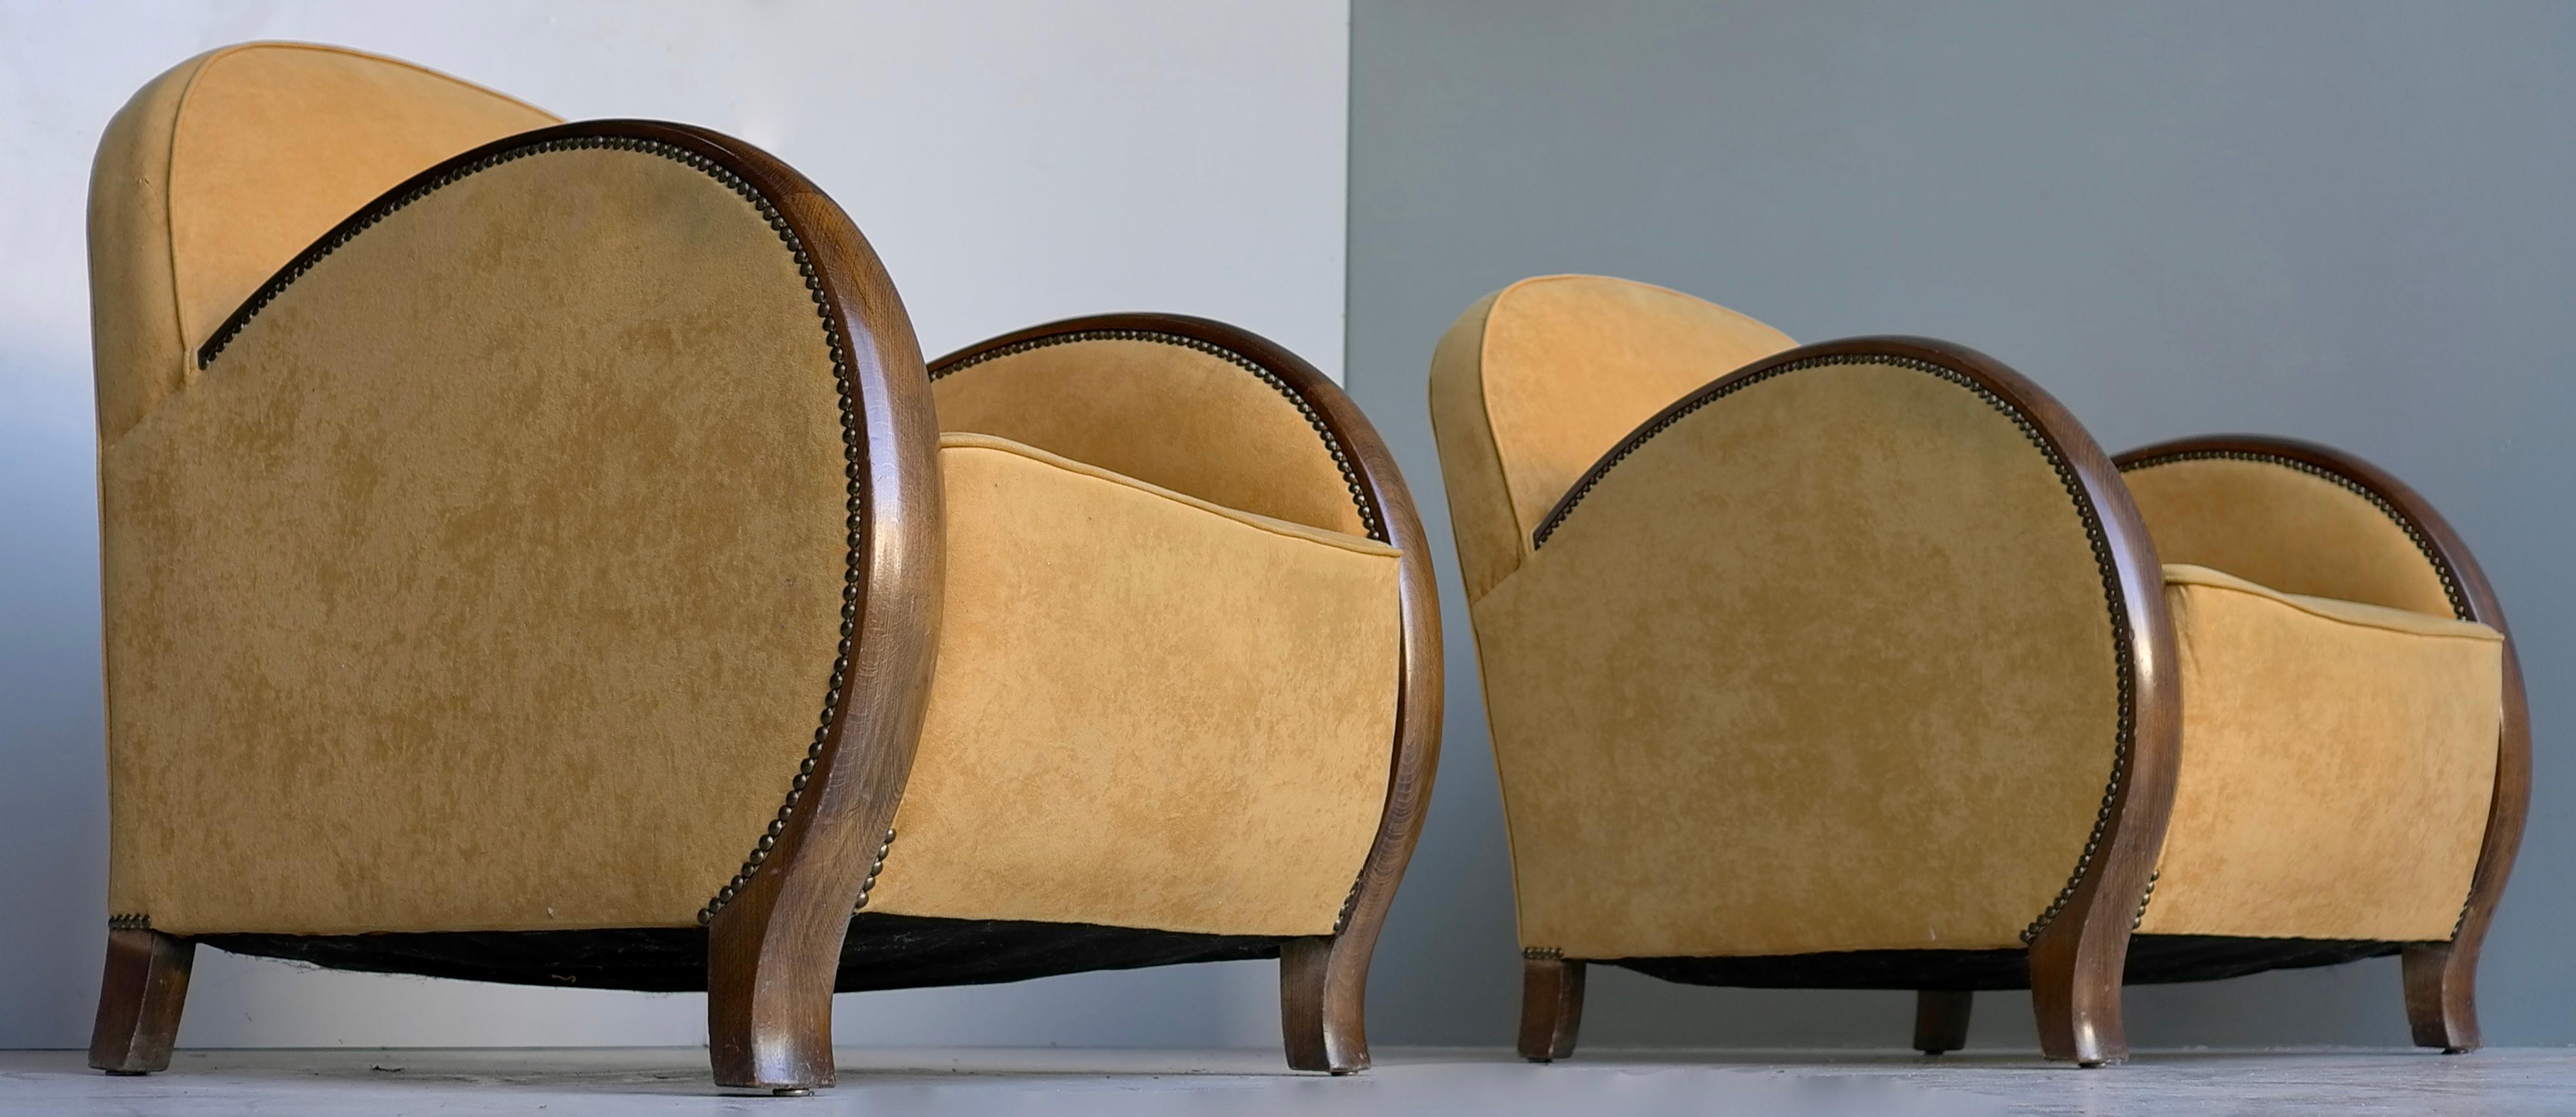 Pair of Art Deco Streamlined Armchairs in yellow Velvet with Wooden arms 1930's For Sale 4